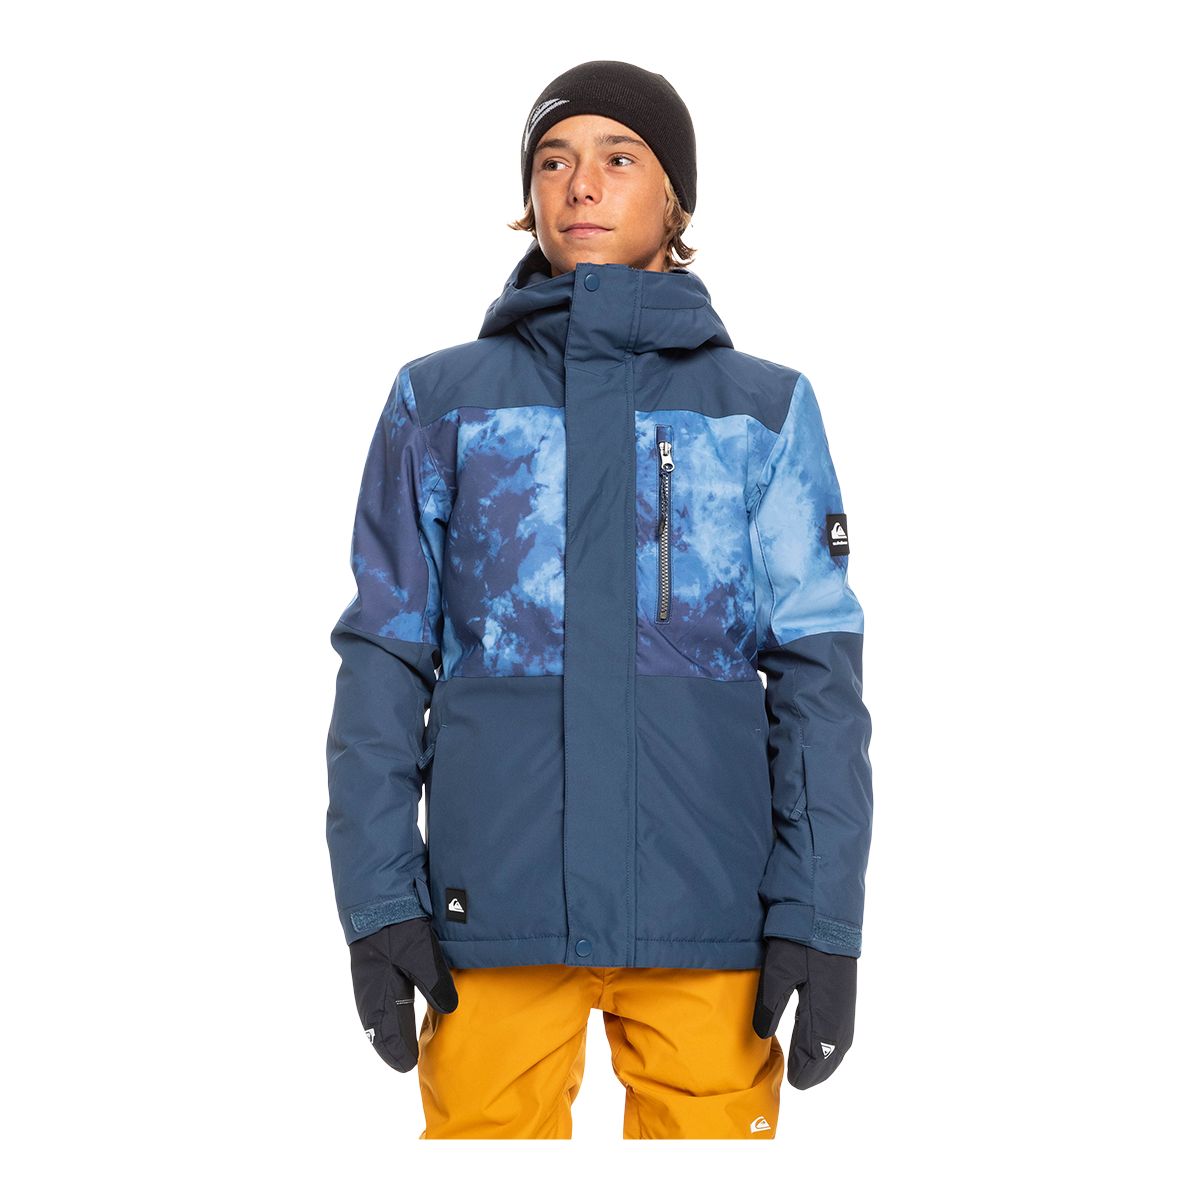 Quiksilver Boys' Mission Printed Block Jacket